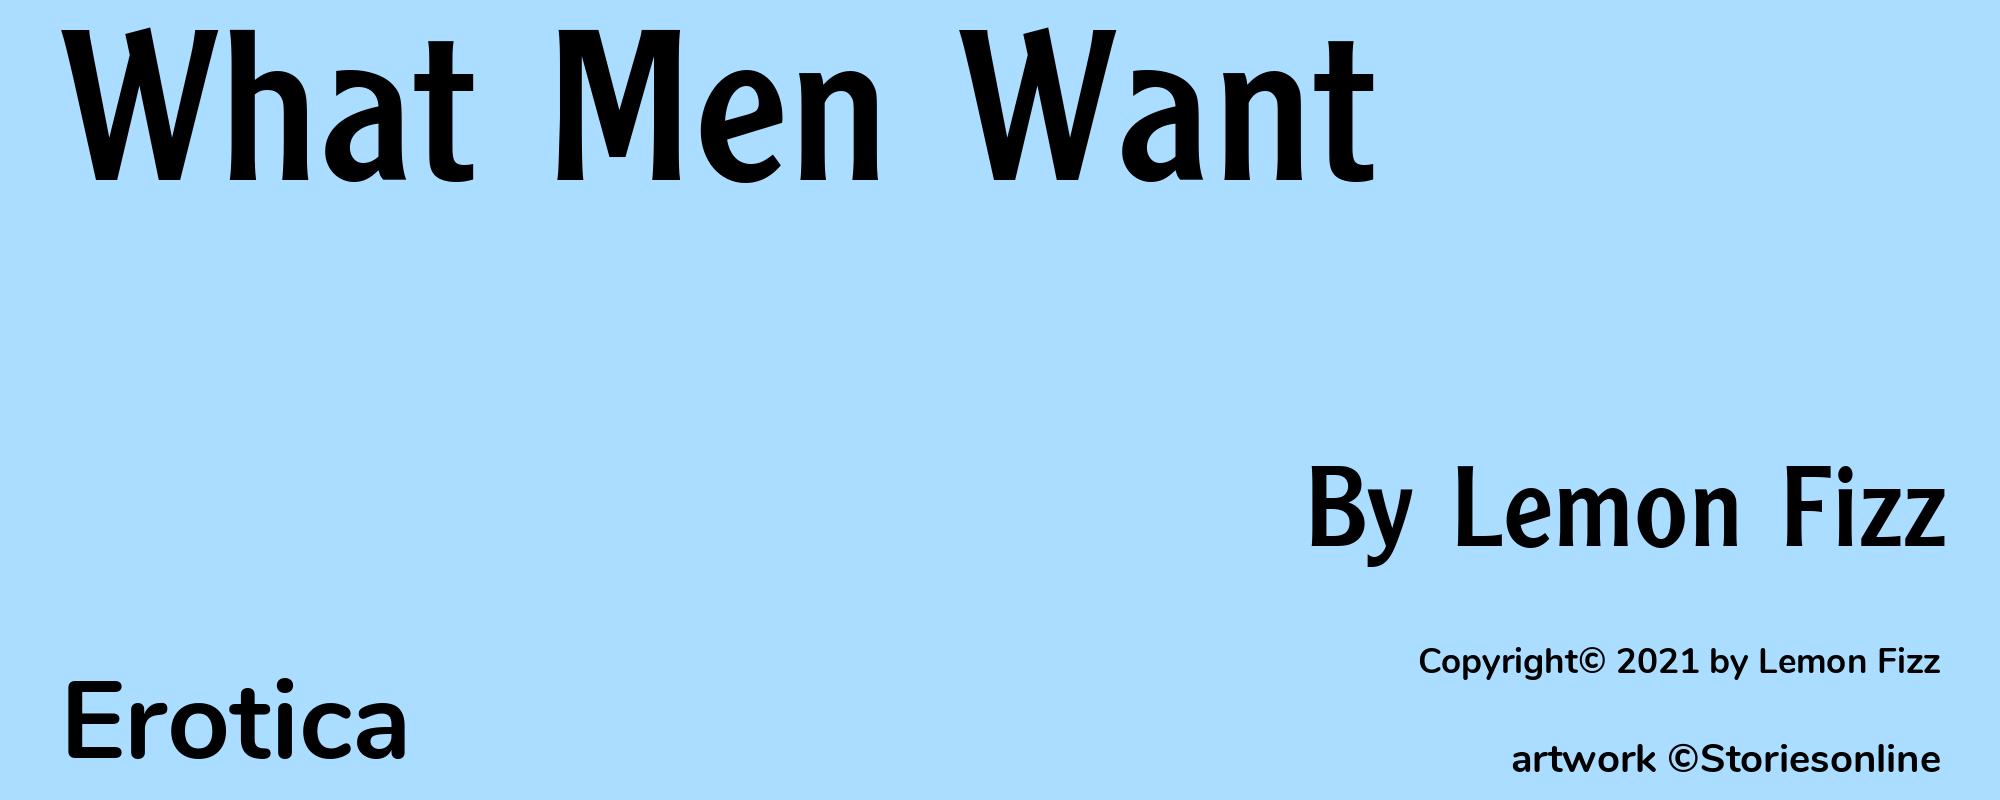 What Men Want - Cover